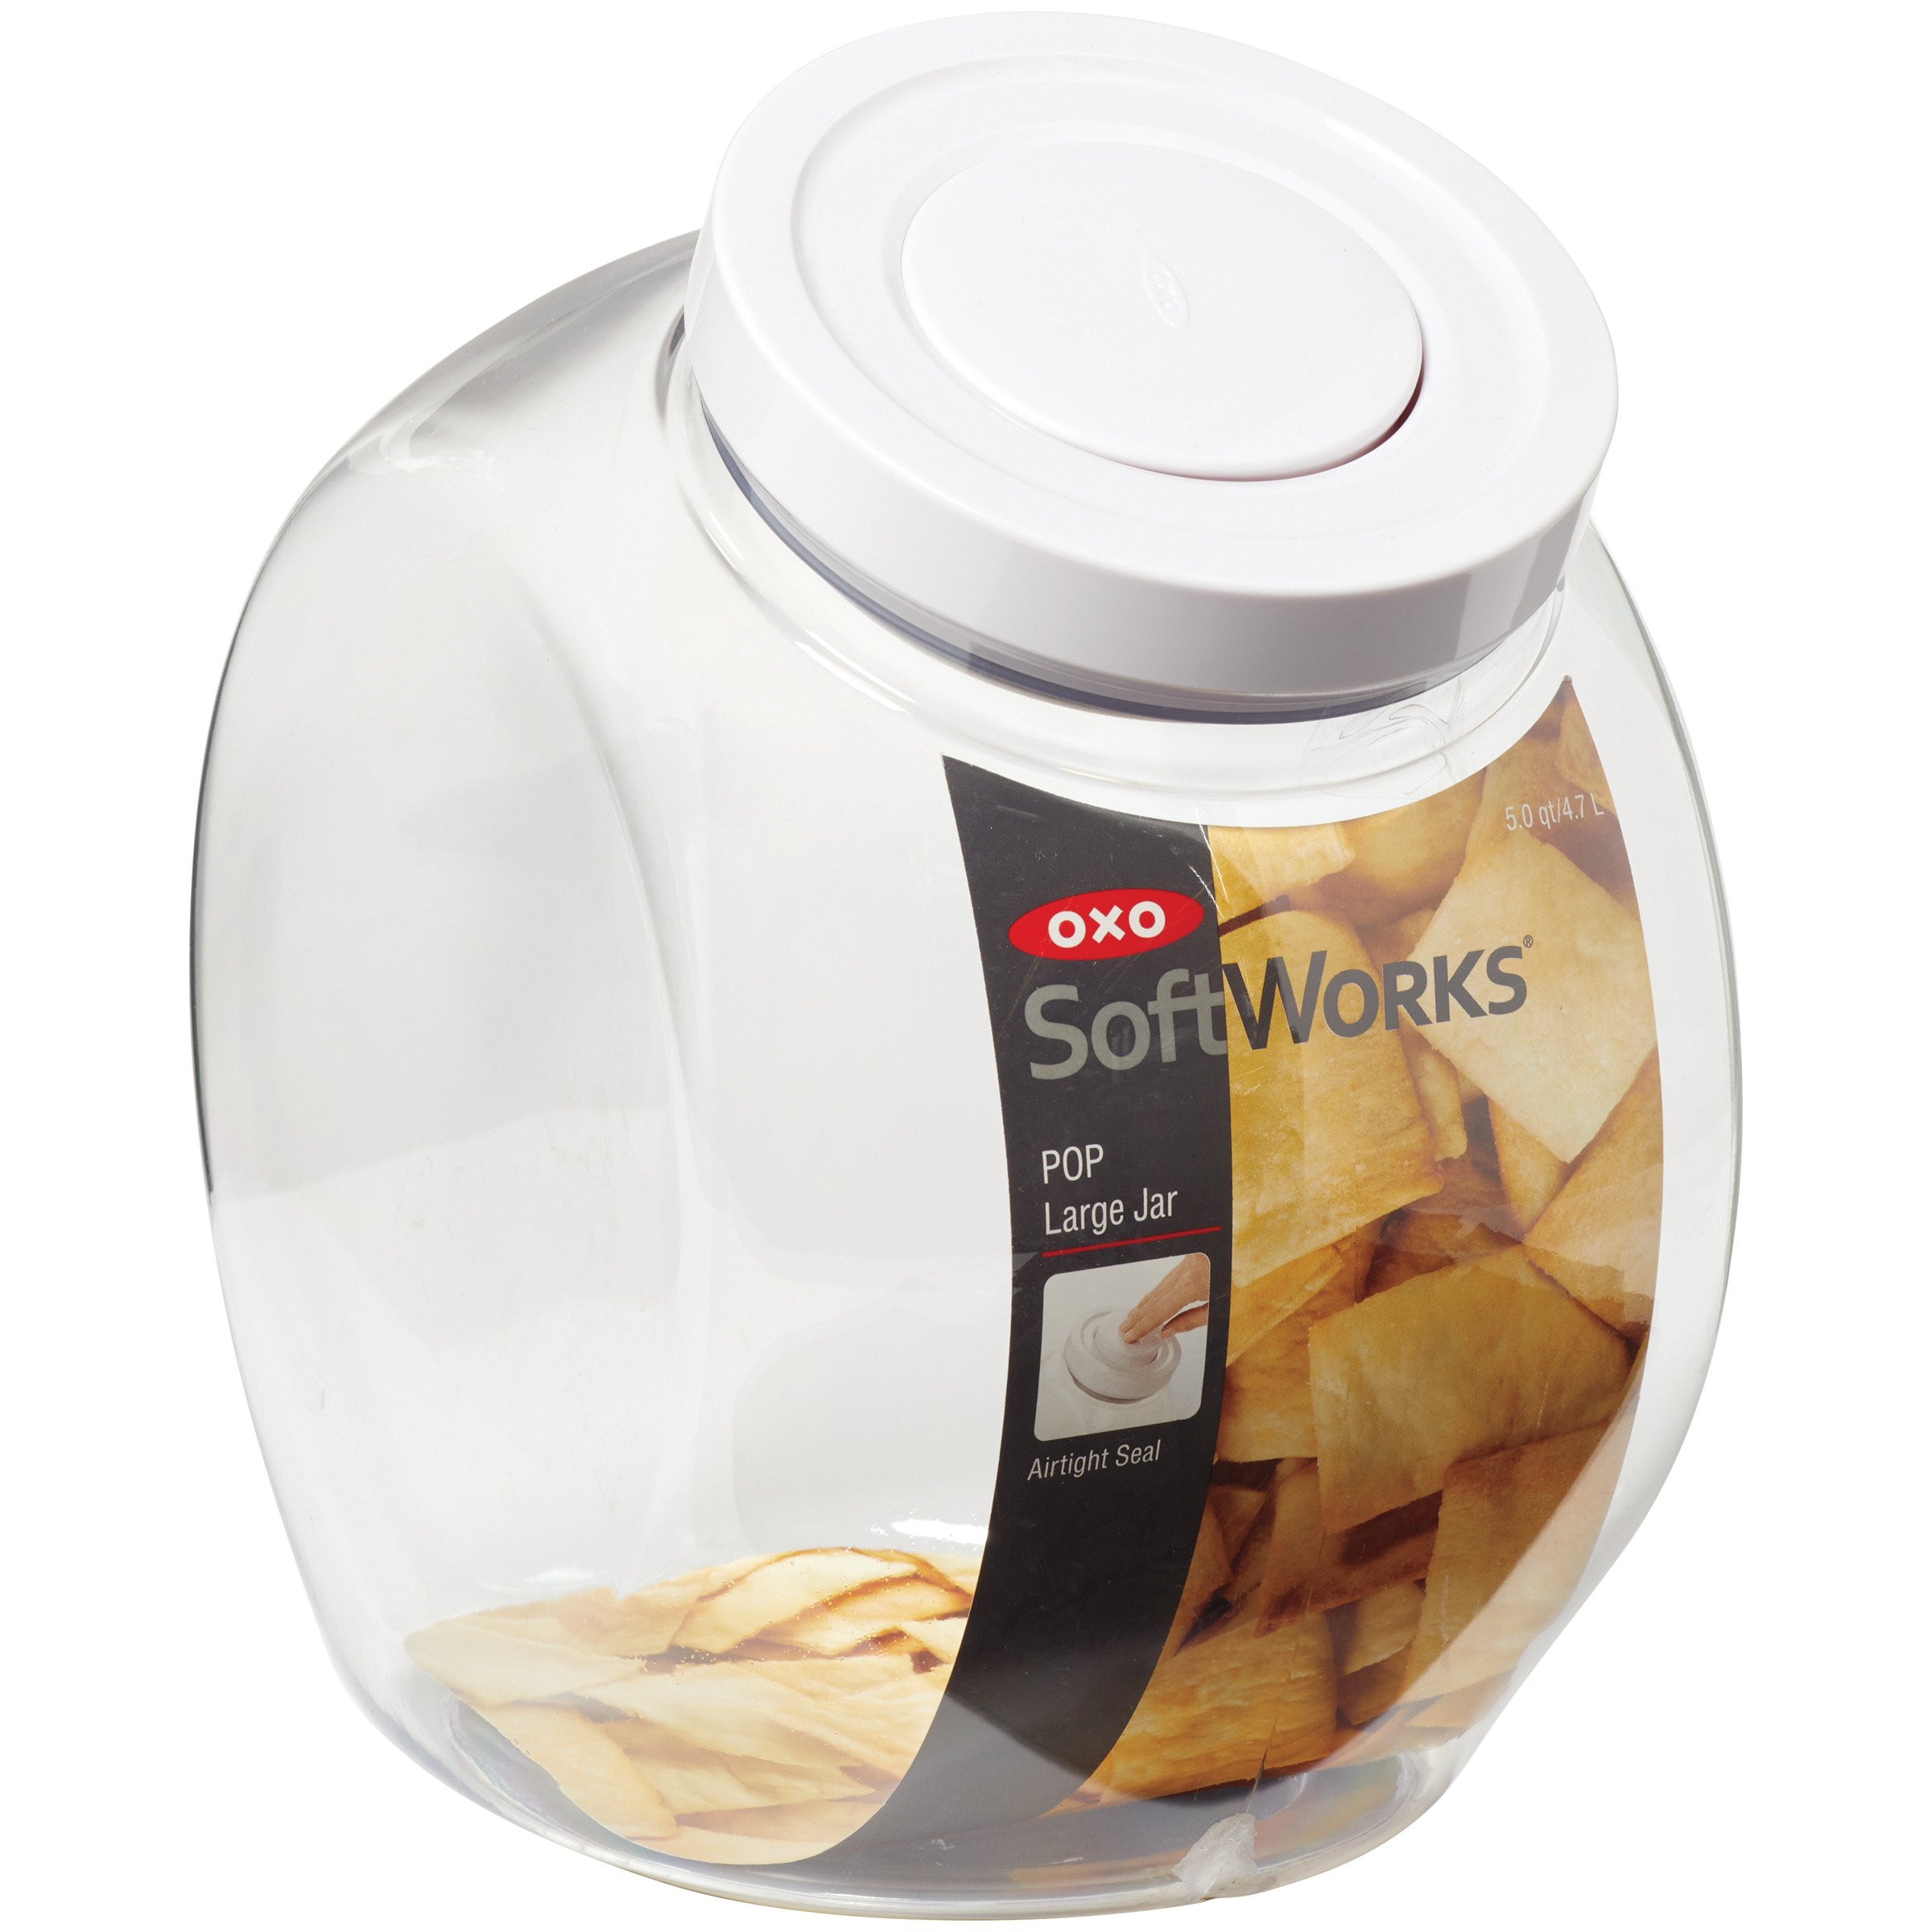  OXO Good Grips 5.0 Qt POP Large Jar - Airtight Food Storage-  for Cookies and More: Food Savers: Home & Kitchen